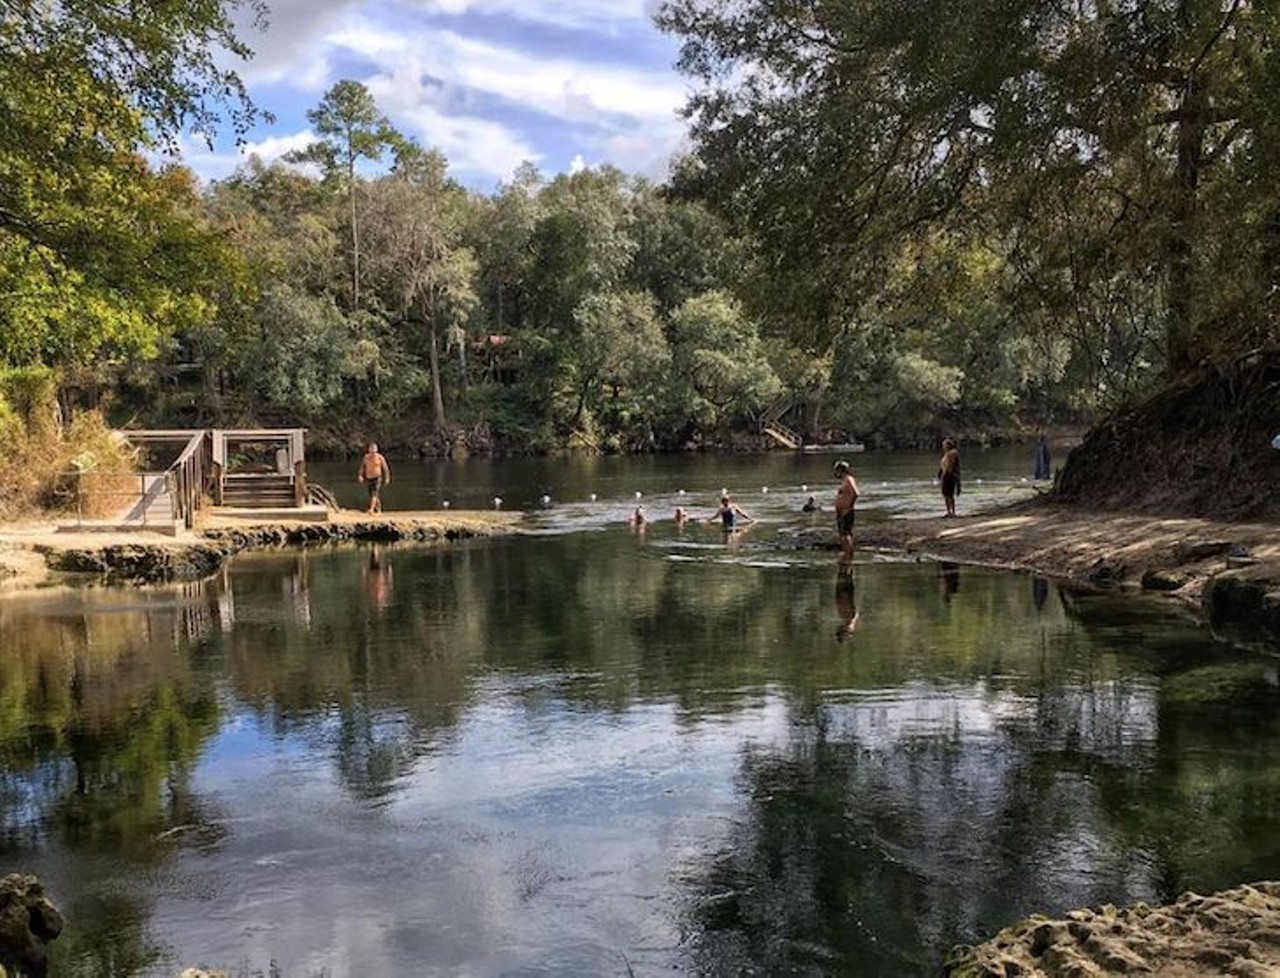 Lafayette Blue Springs
799 Northwest Blue Springs Road, Mayo
2 hours, 50 minutes away
Take a dip beneath a canopy of Spanish moss in this isolated forest spring that looks like something out of an medieval adventure novel, complete with a mossy stone wall on one side and the expanse of the Suwannee Riverbed on the other.  
Photo via delanydean/Instagram